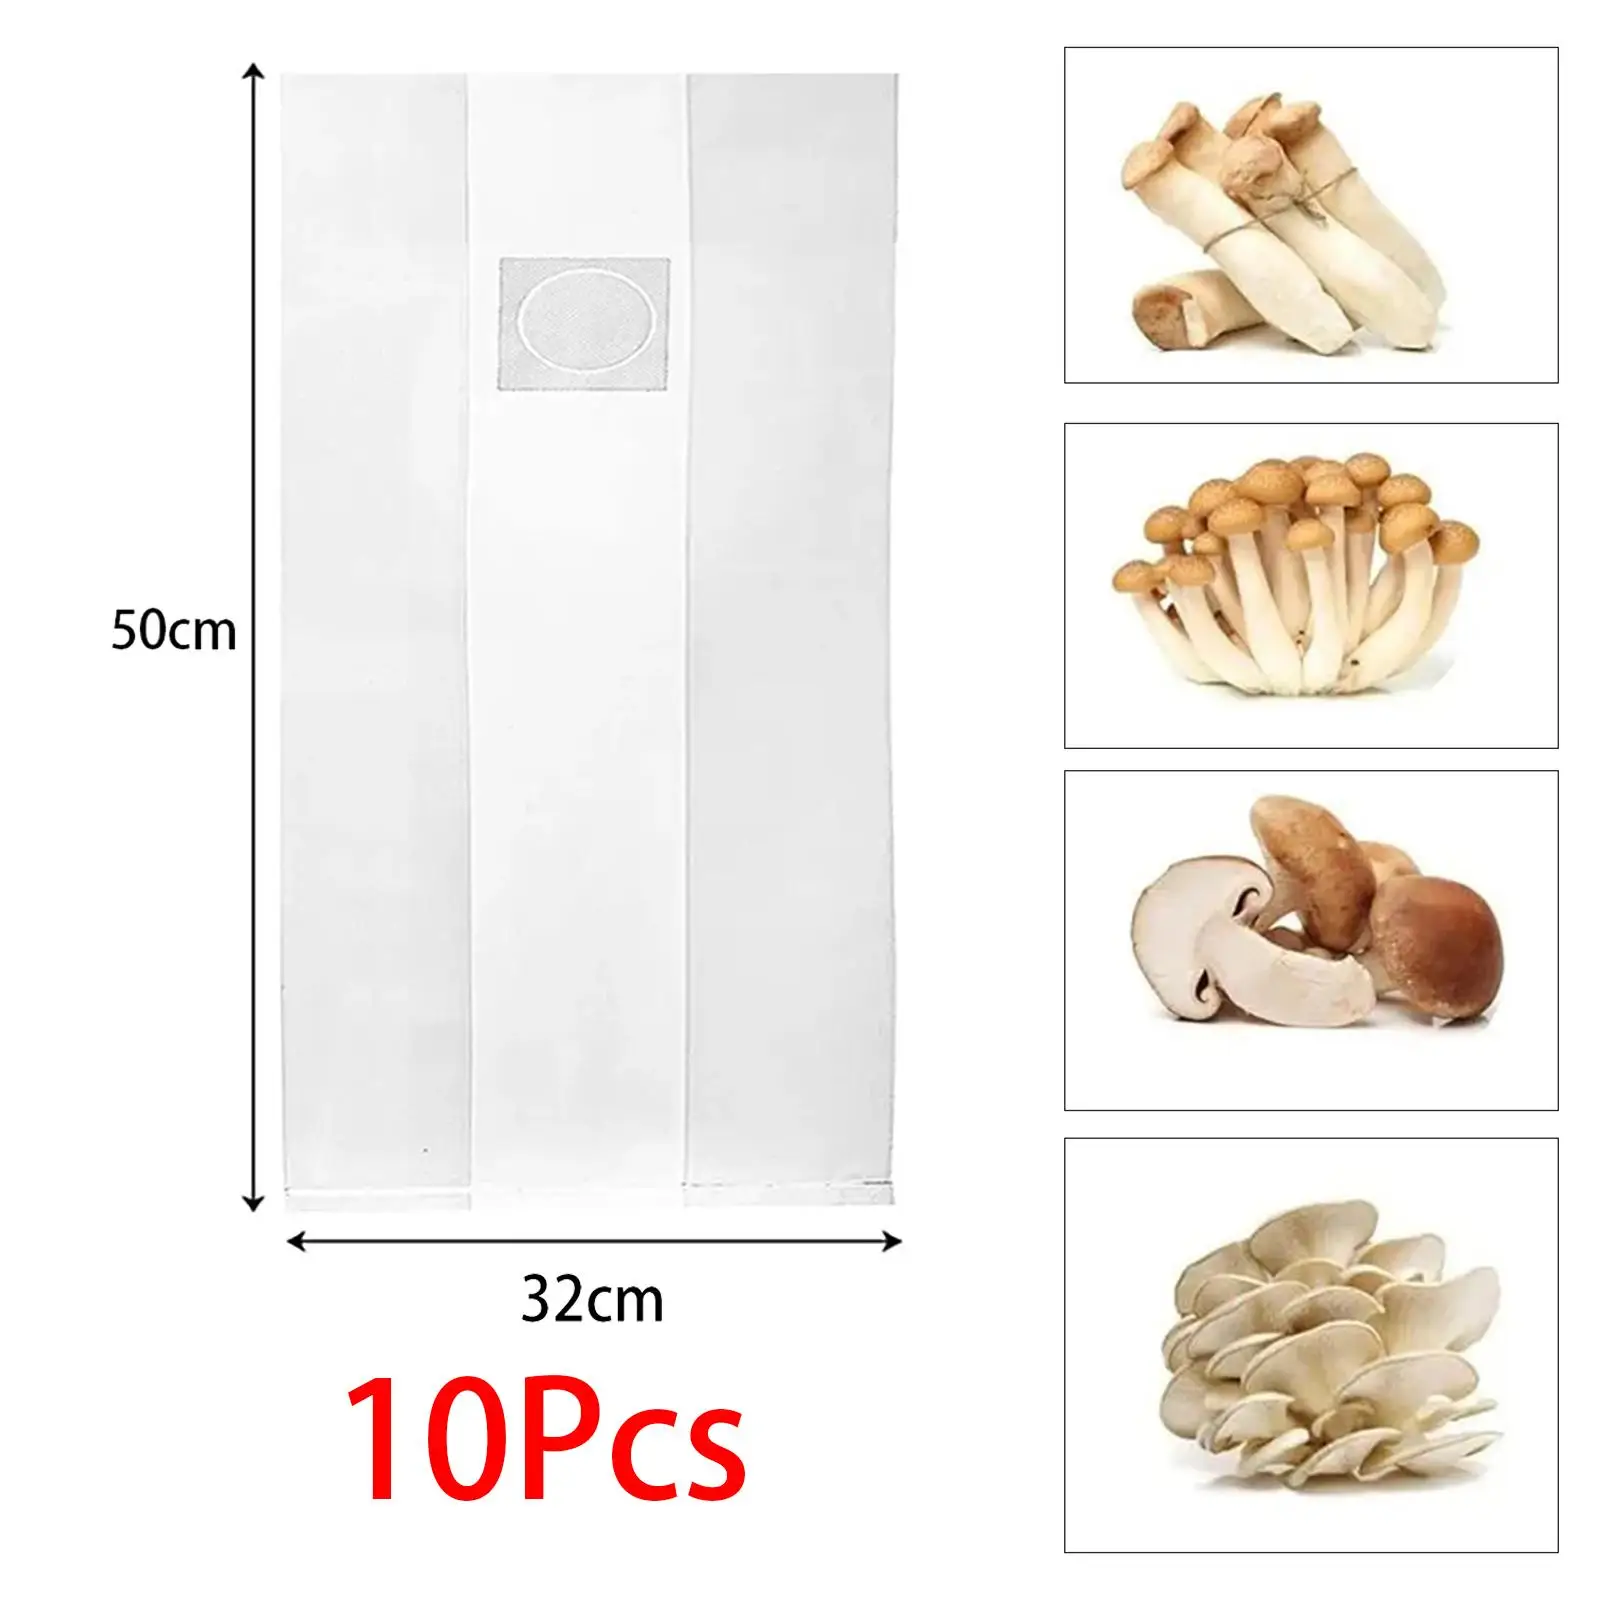 20x Spawning Bags Edible Fungi Growing Bags Large Tear Resistant Strong Extra